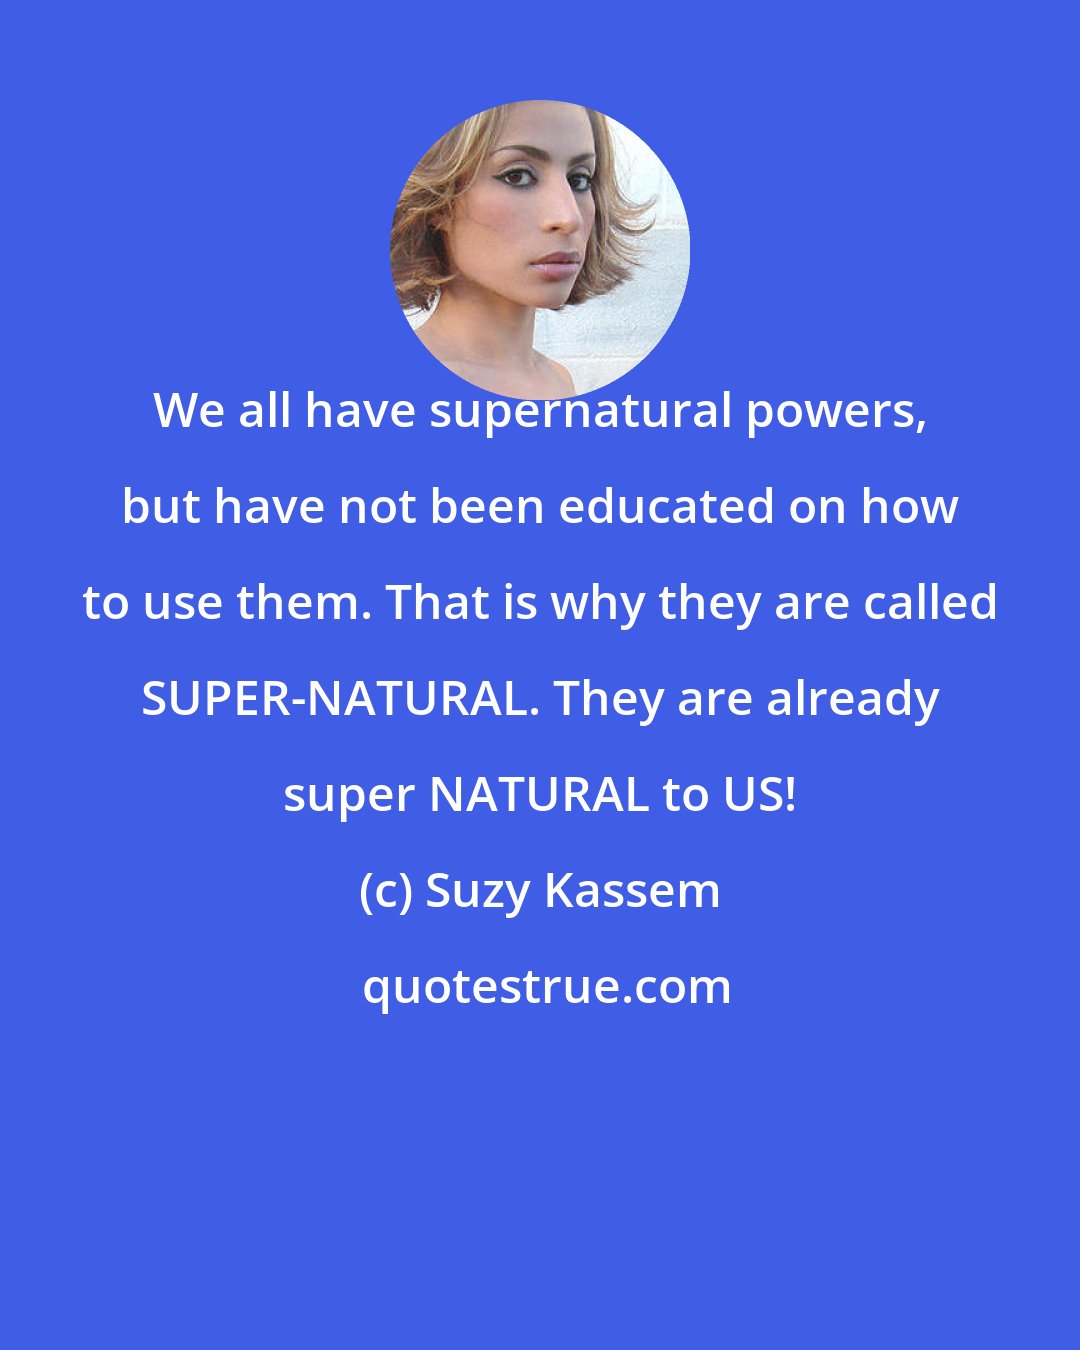 Suzy Kassem: We all have supernatural powers, but have not been educated on how to use them. That is why they are called SUPER-NATURAL. They are already super NATURAL to US!